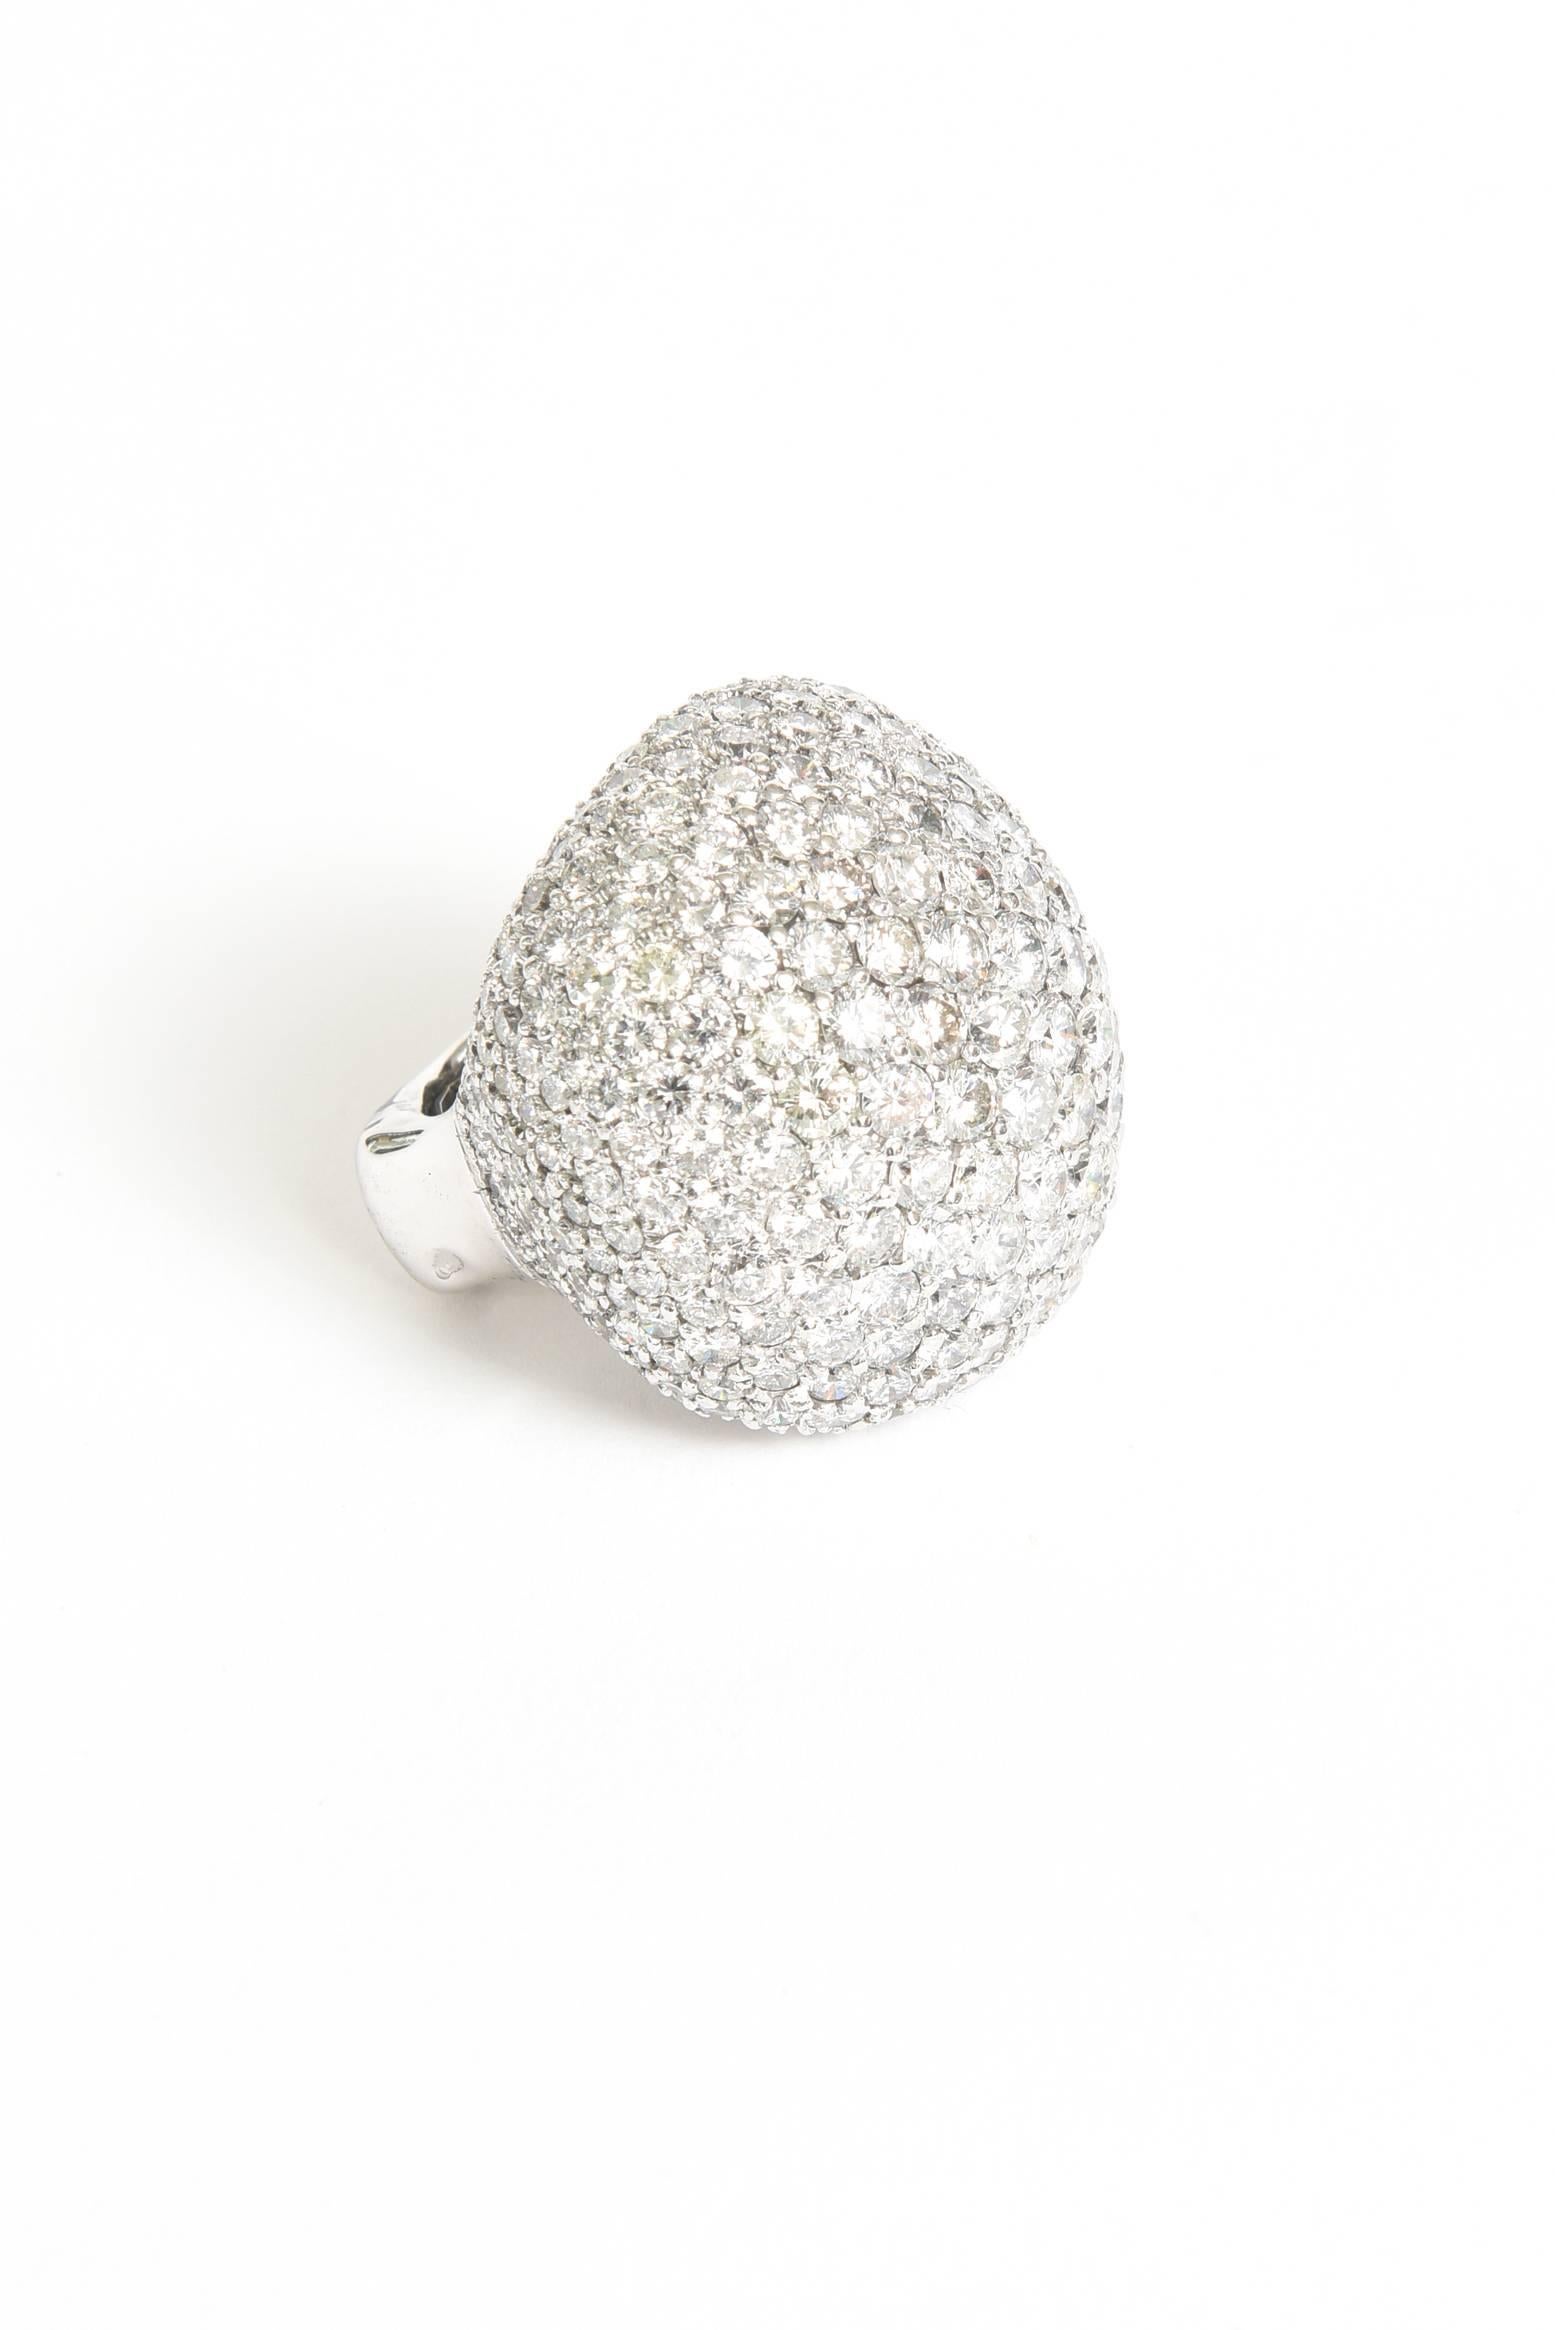 This dramatic and exquisite large cocktail/dome ring is not for the timid. It has high drama to it in an exquisite way.  It speaks volume of diamonds and volume of sparkling light. It contains 24 carats of round brilliant diamonds set in 18 K white